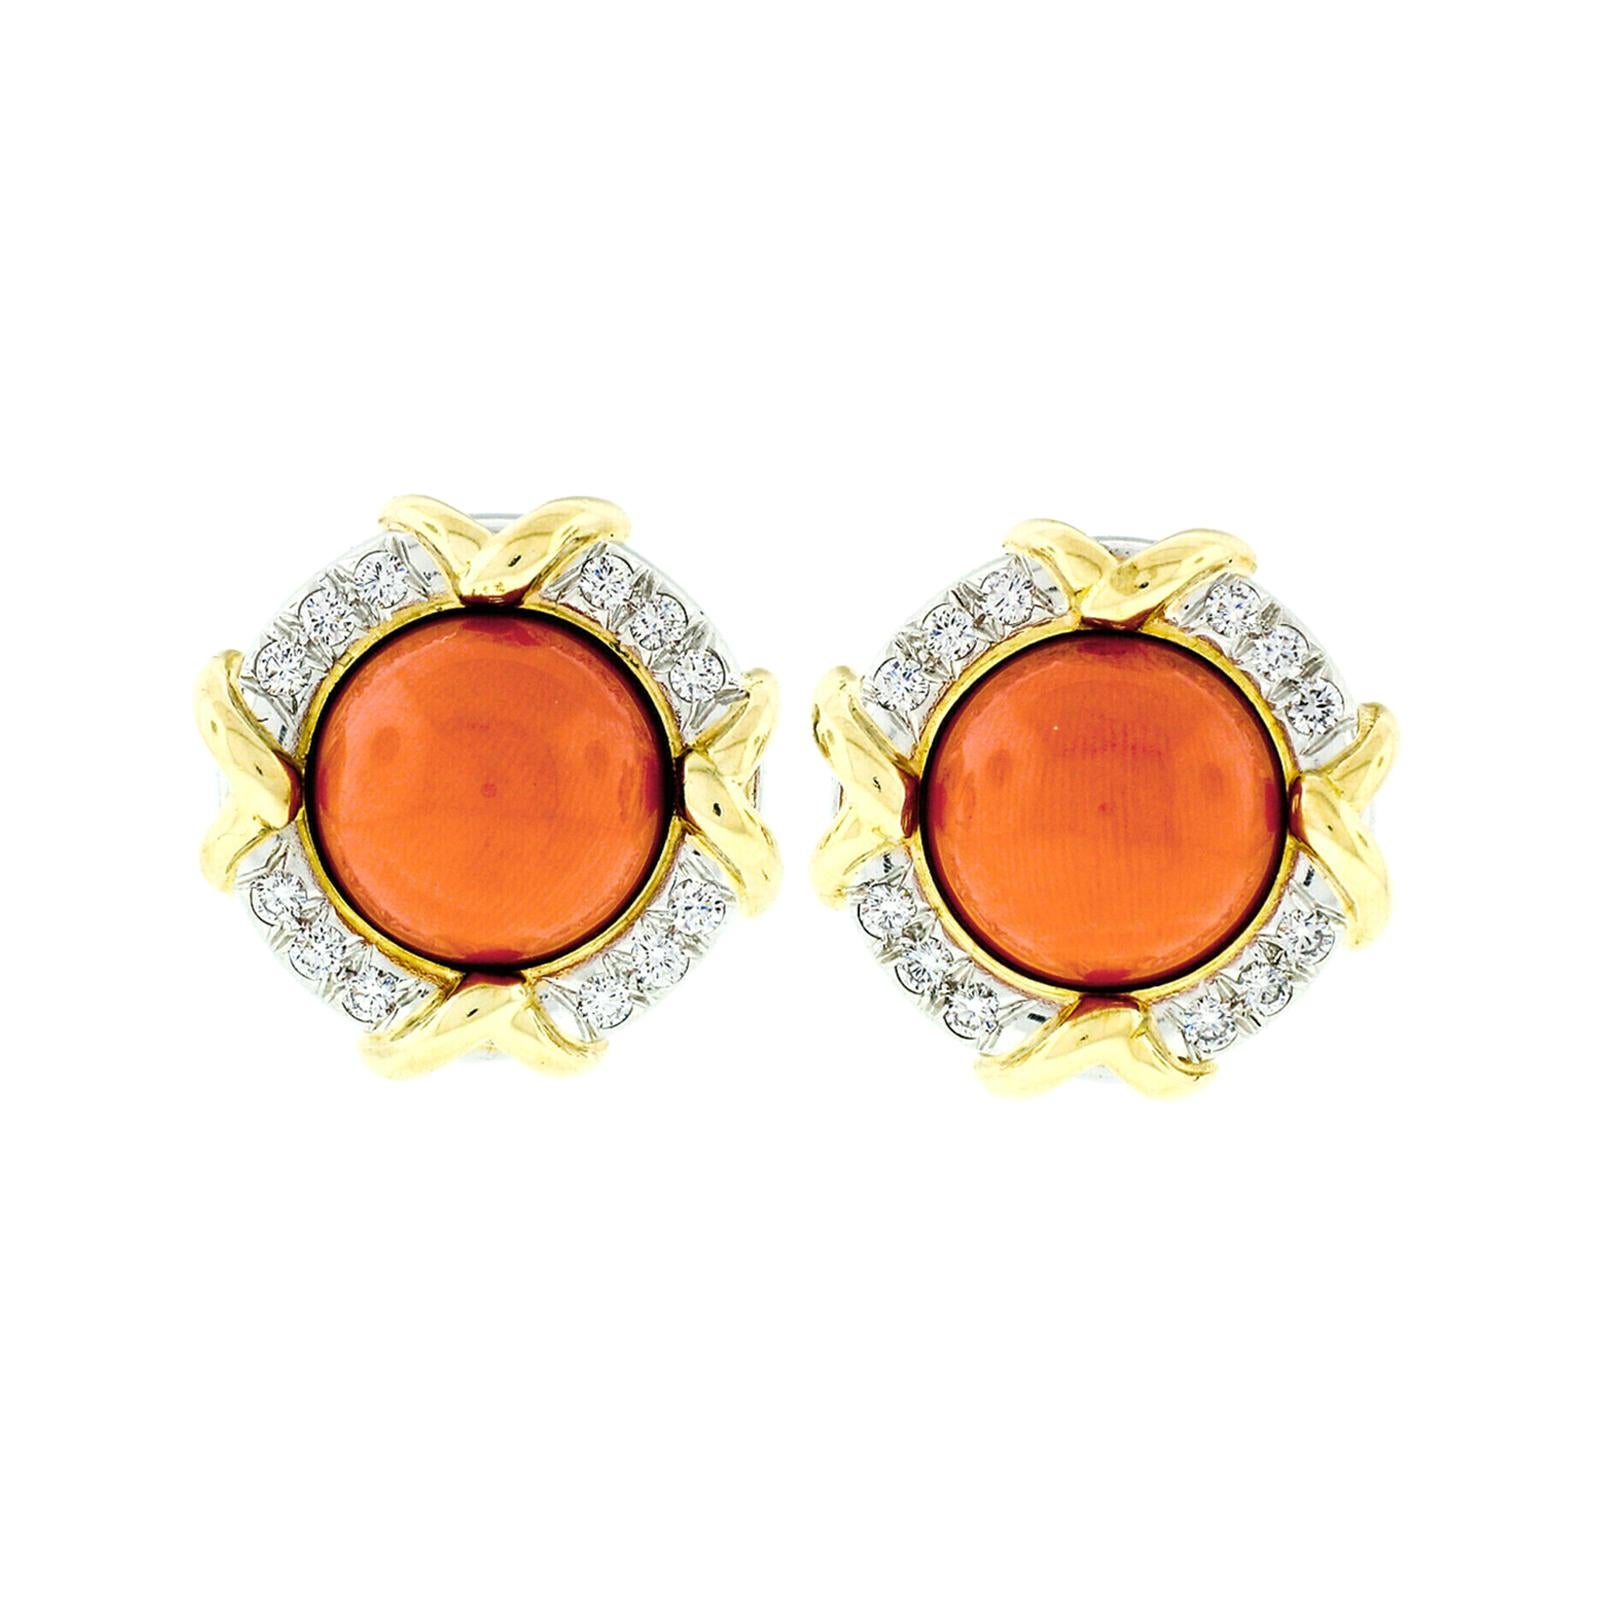 Tiffany & Co. 1985 18k Gold & Platinum GIA Round Coral & Diamond Button Earrings For Sale